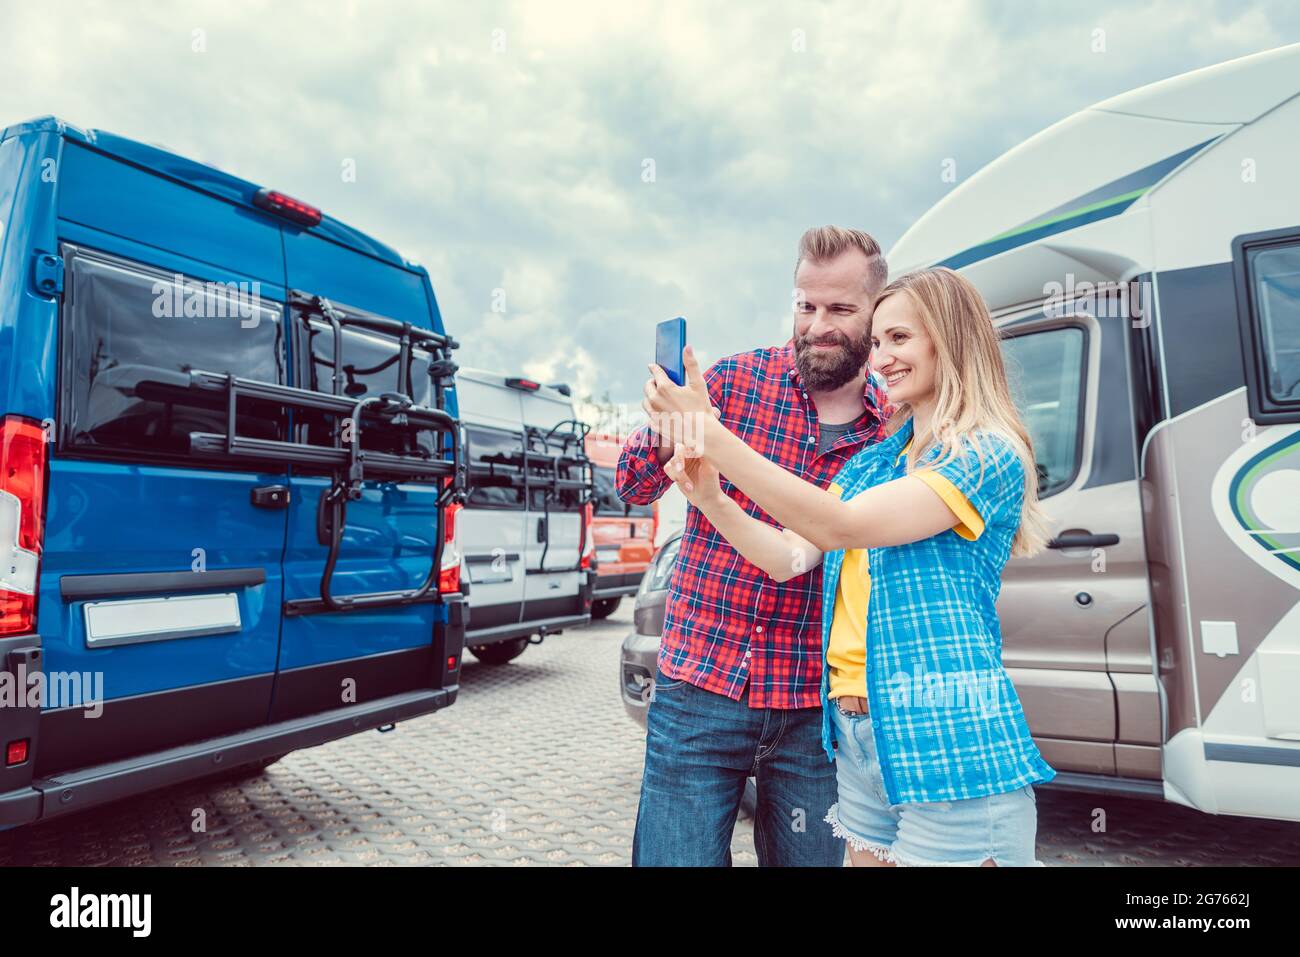 Woman and man taking selfie in front of RV or camper in anticipation Stock Photo